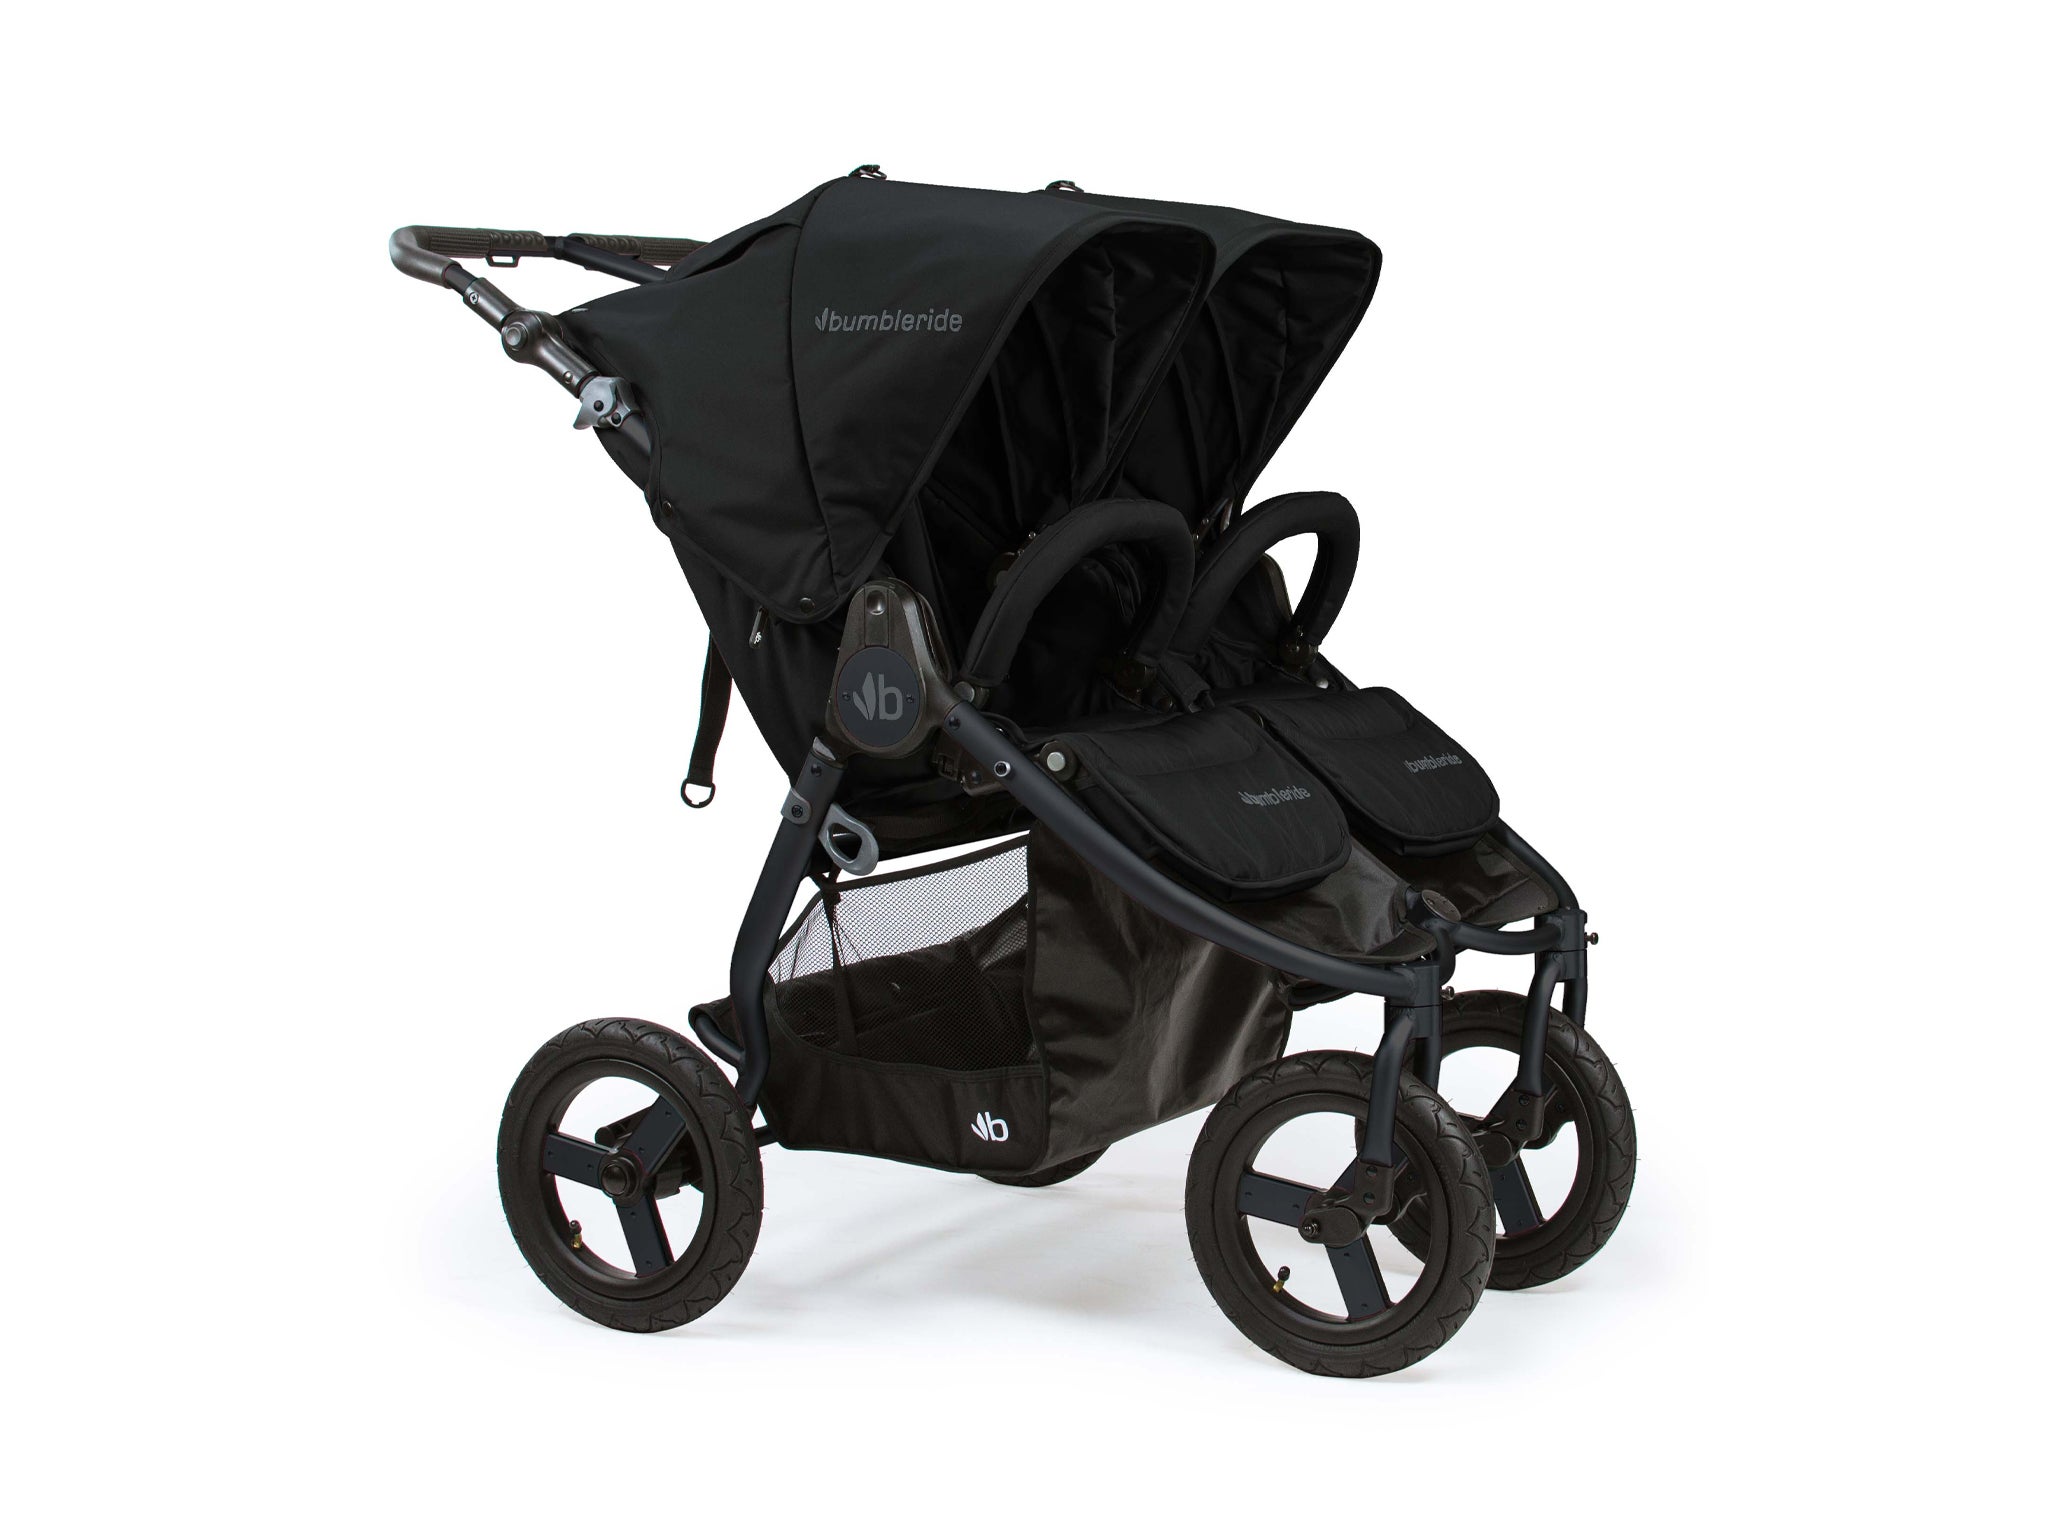 smallest double buggy on the market